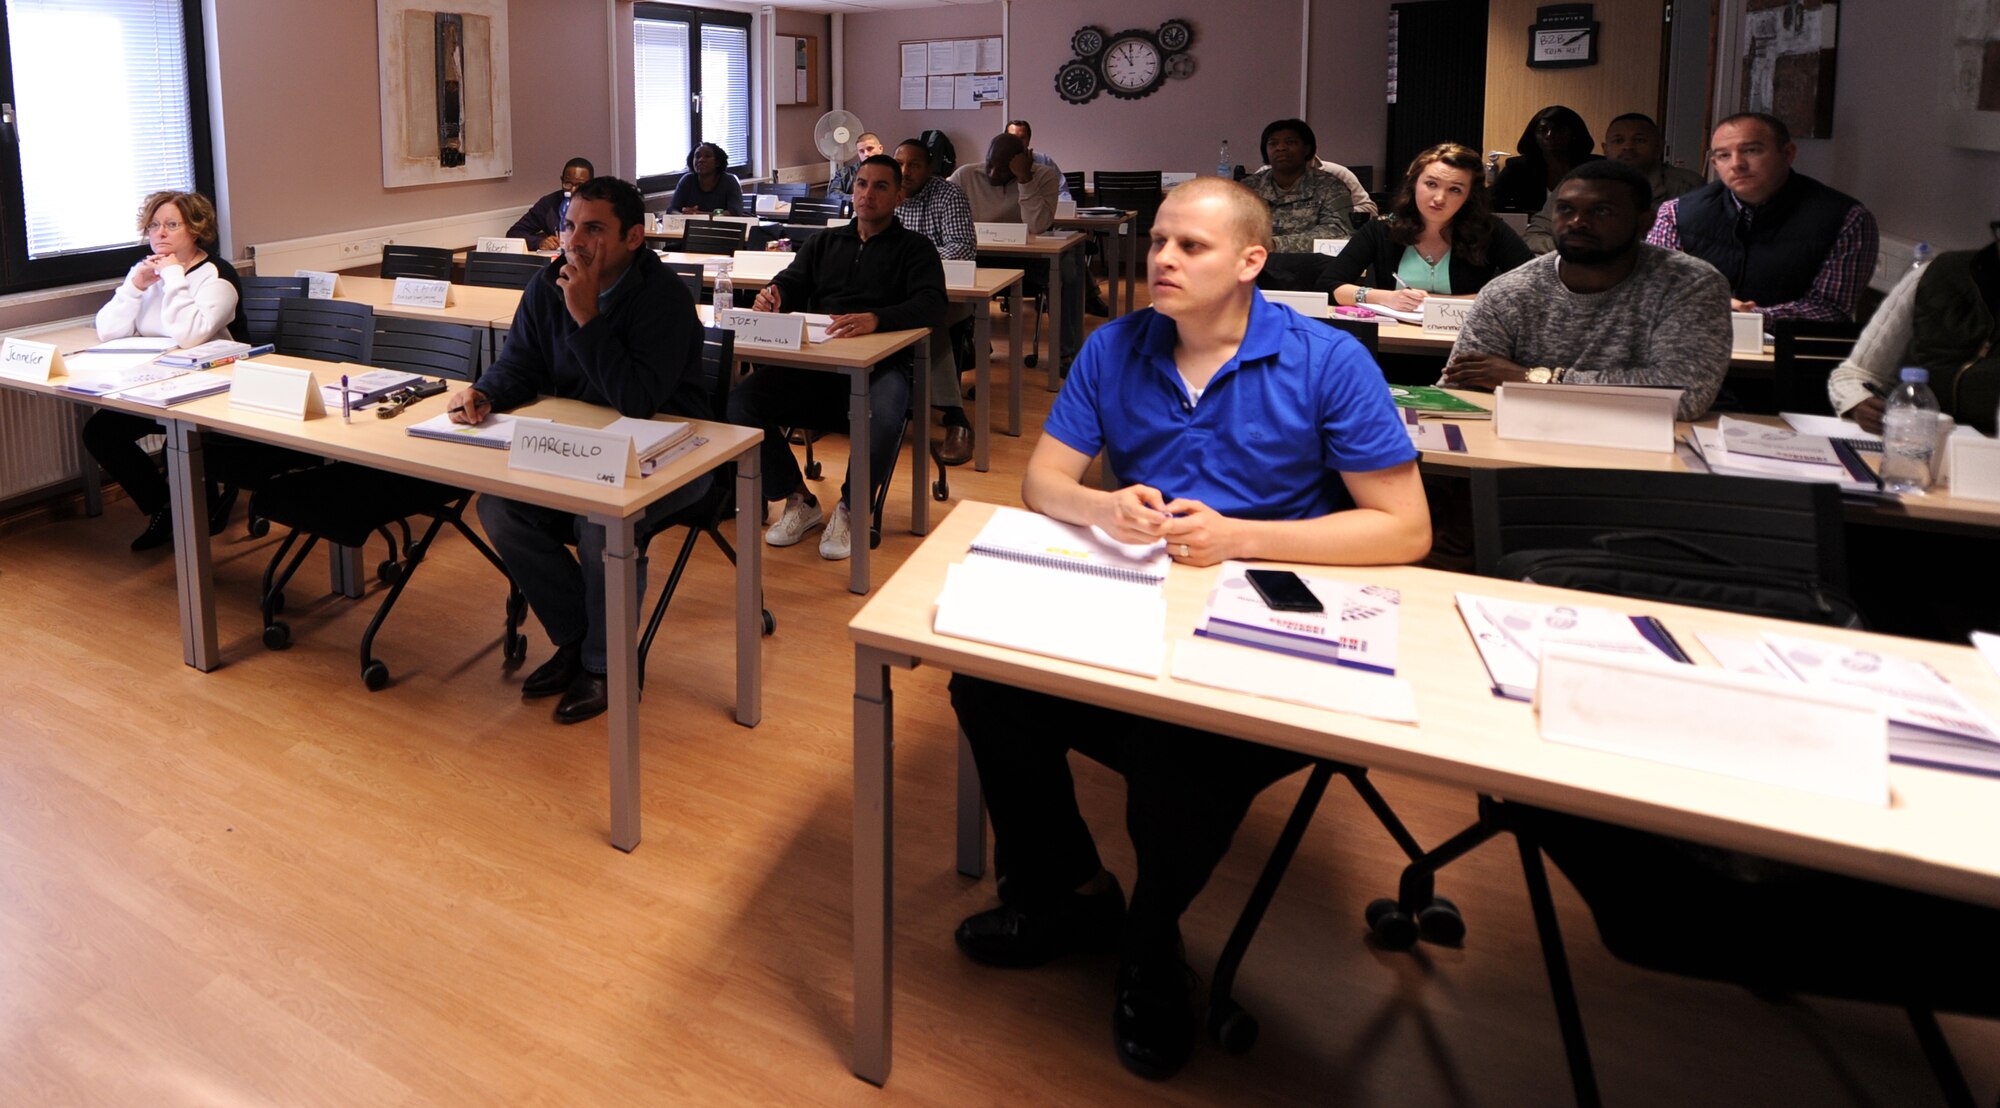 Students listen to a lecture during a Boots 2 Business class Sept. 29, 2015, at Ramstein Air Base, Germany. B2B is a two-day workshop and an optional eight-week online course aimed at providing entrepreneurship training to service members transitioning out of the military and wanting to start a business. B2B is currently offered at more than 165 military installations. (U.S. Air Force photo/Staff Sgt. Sharida Jackson)